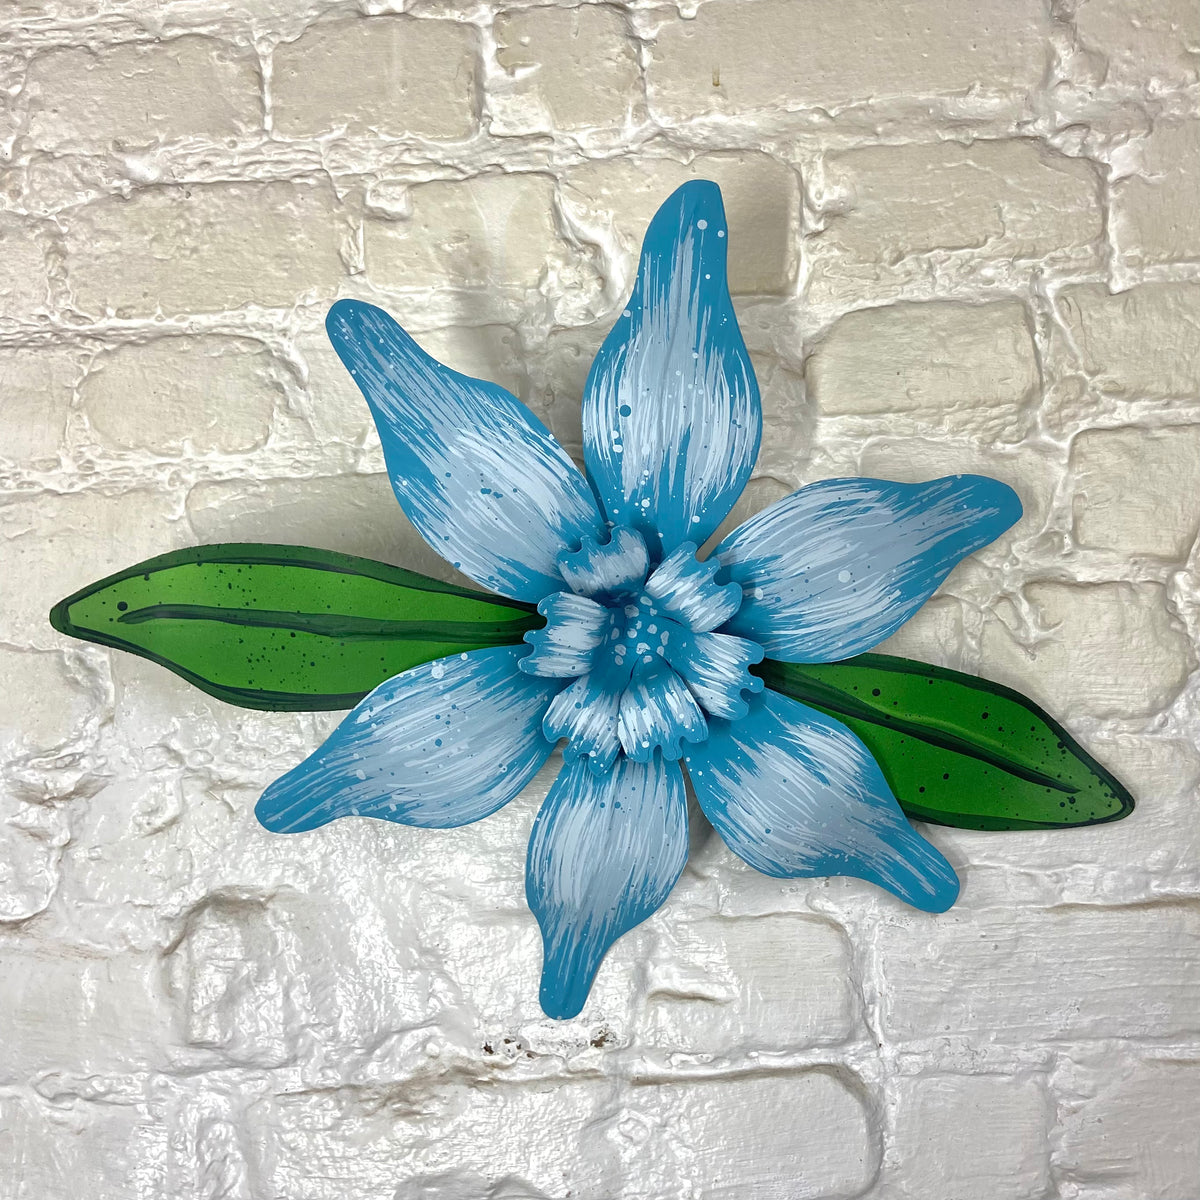 15" Small Teal with Leaves Carnival House Float Flower